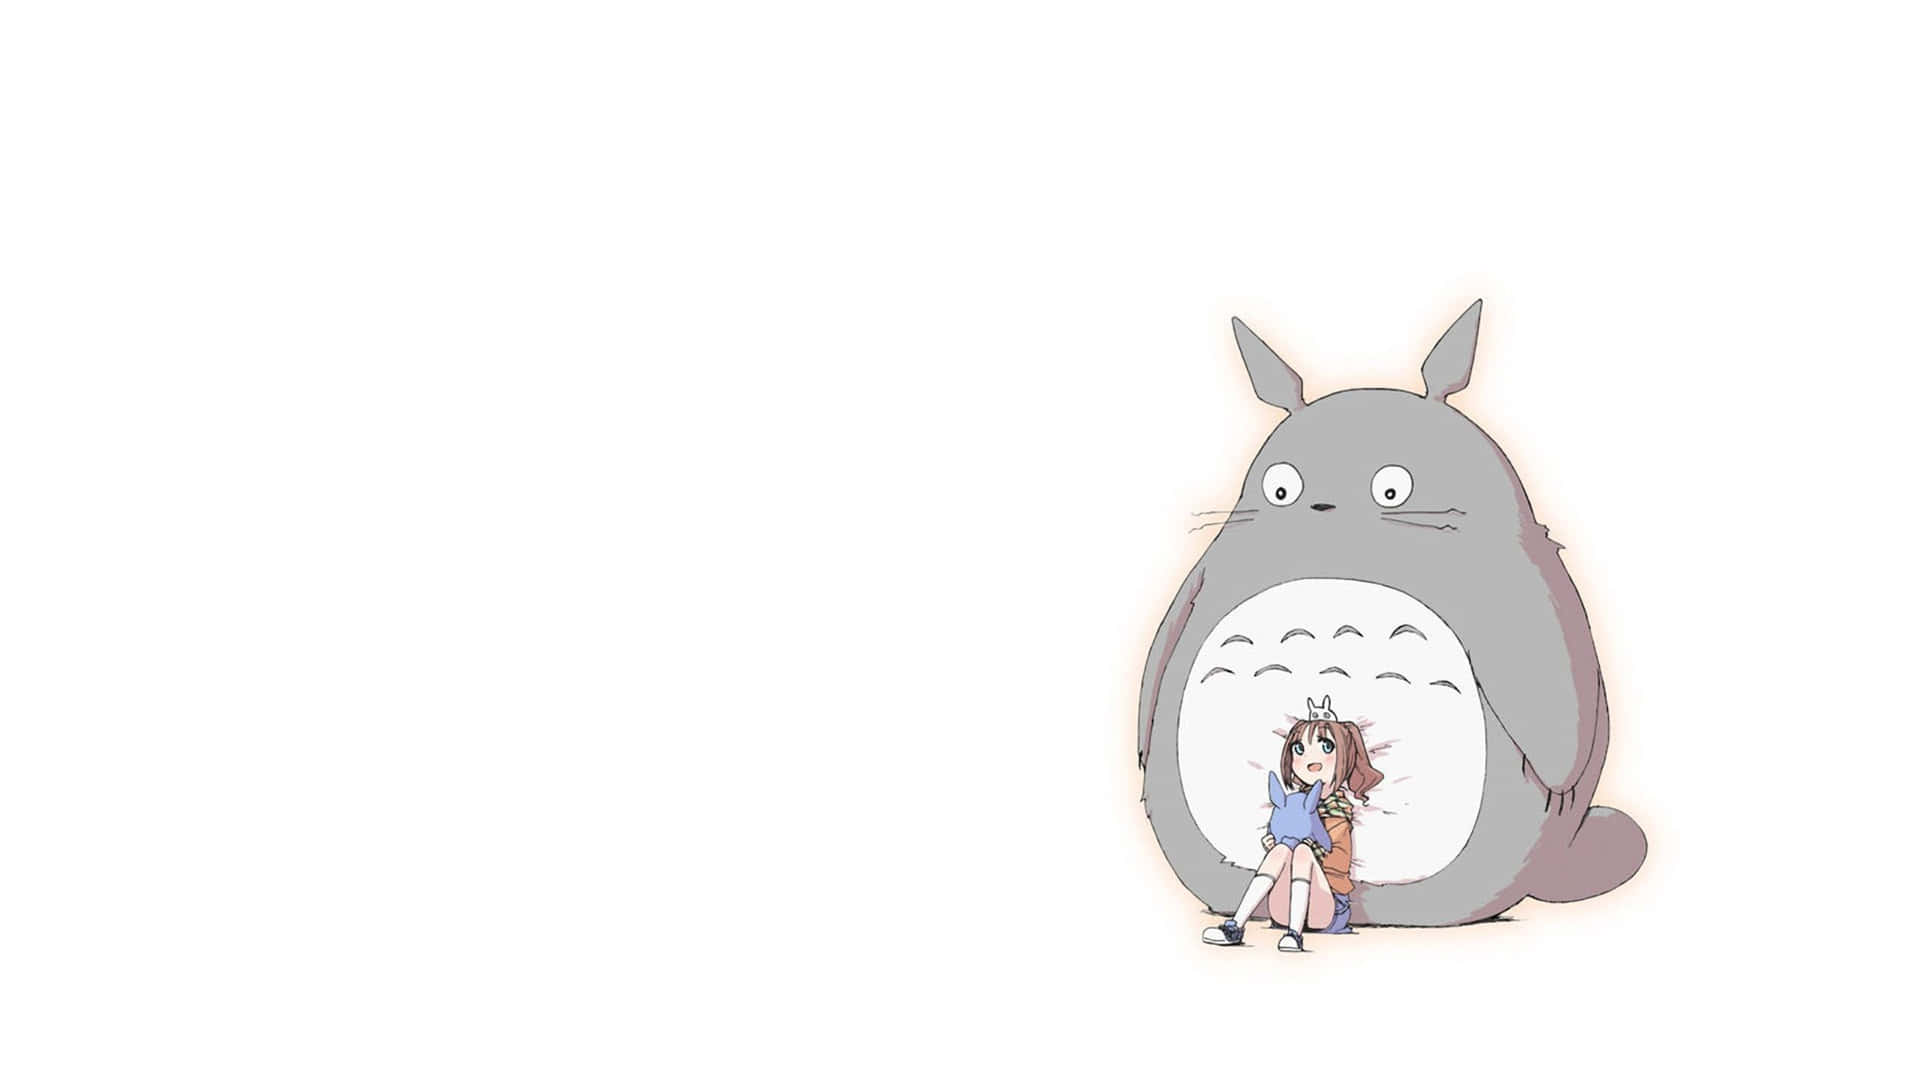 Get Lost in the Woods with Totoro